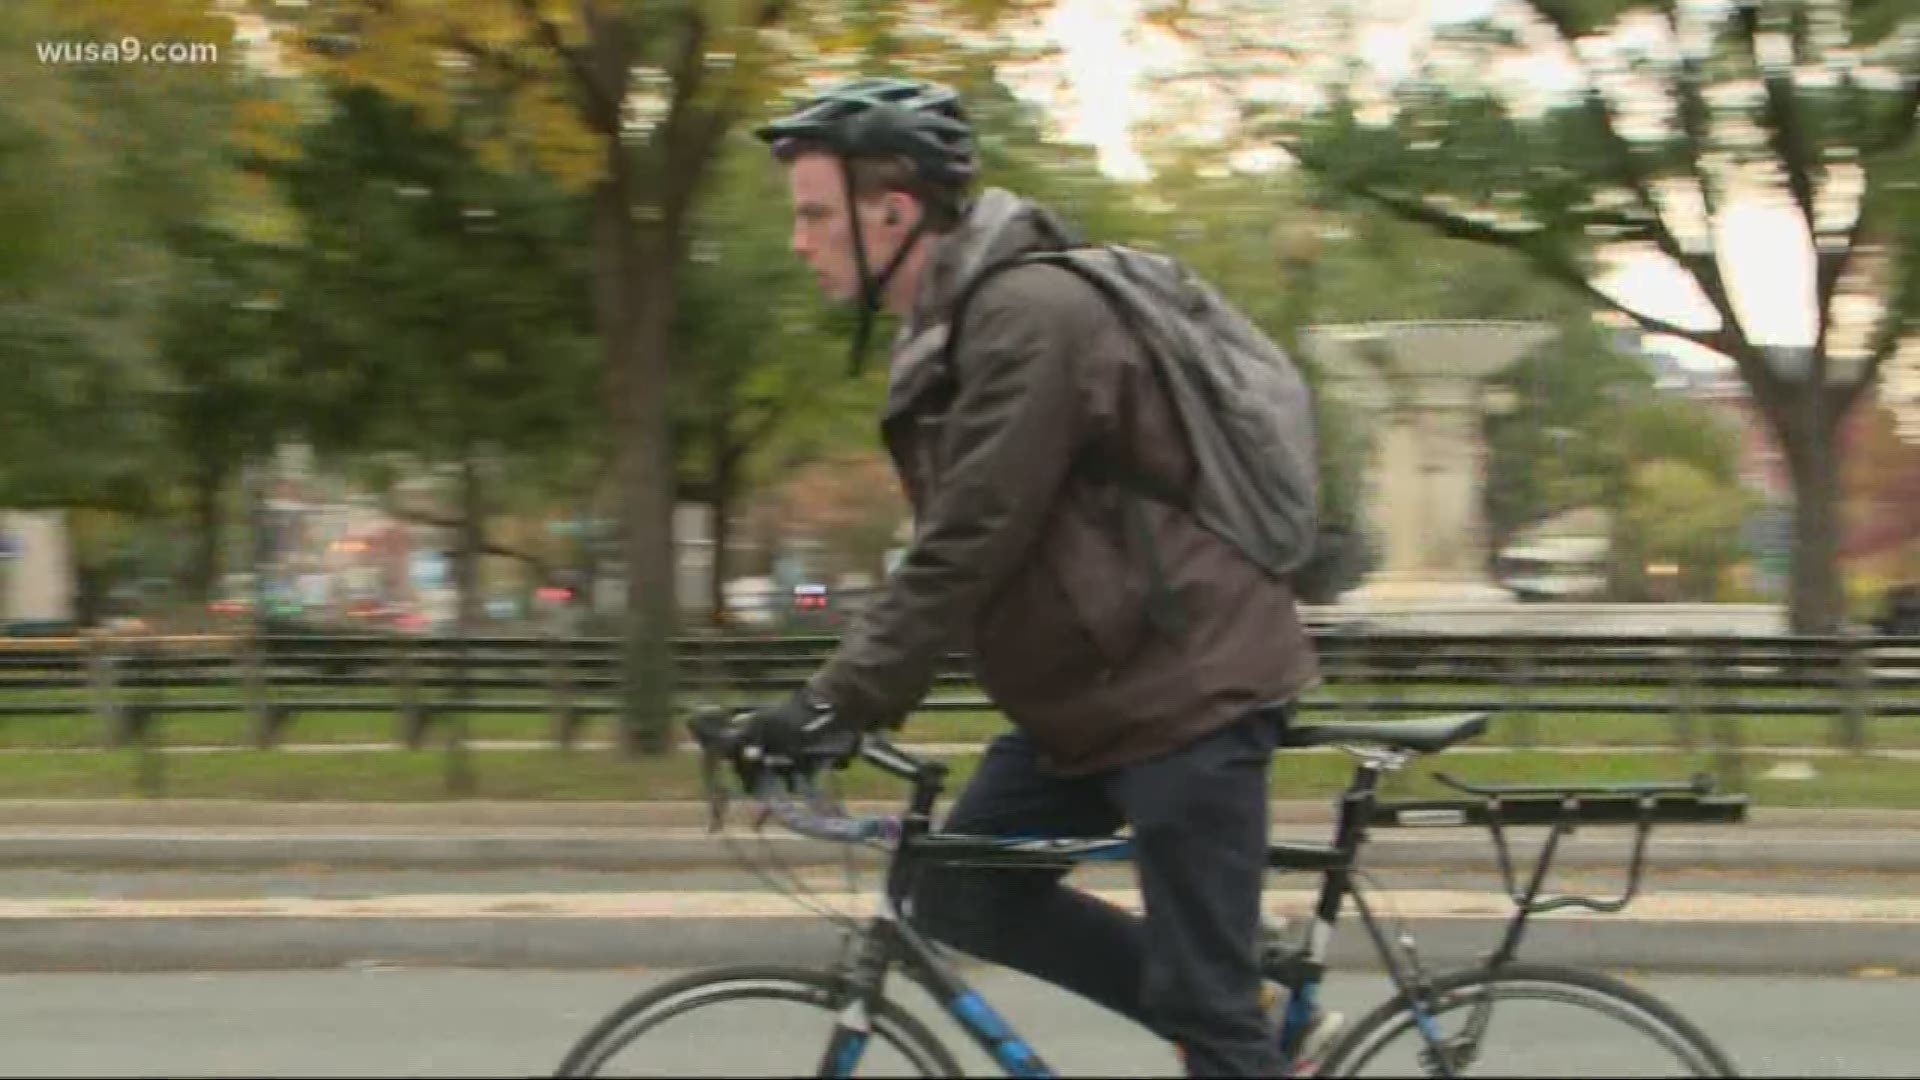 The NTSB is recommending that State law should require all bike riders to wear a helmet. Bruce spoke with a member of a major bicyclist group who is opposed to this.